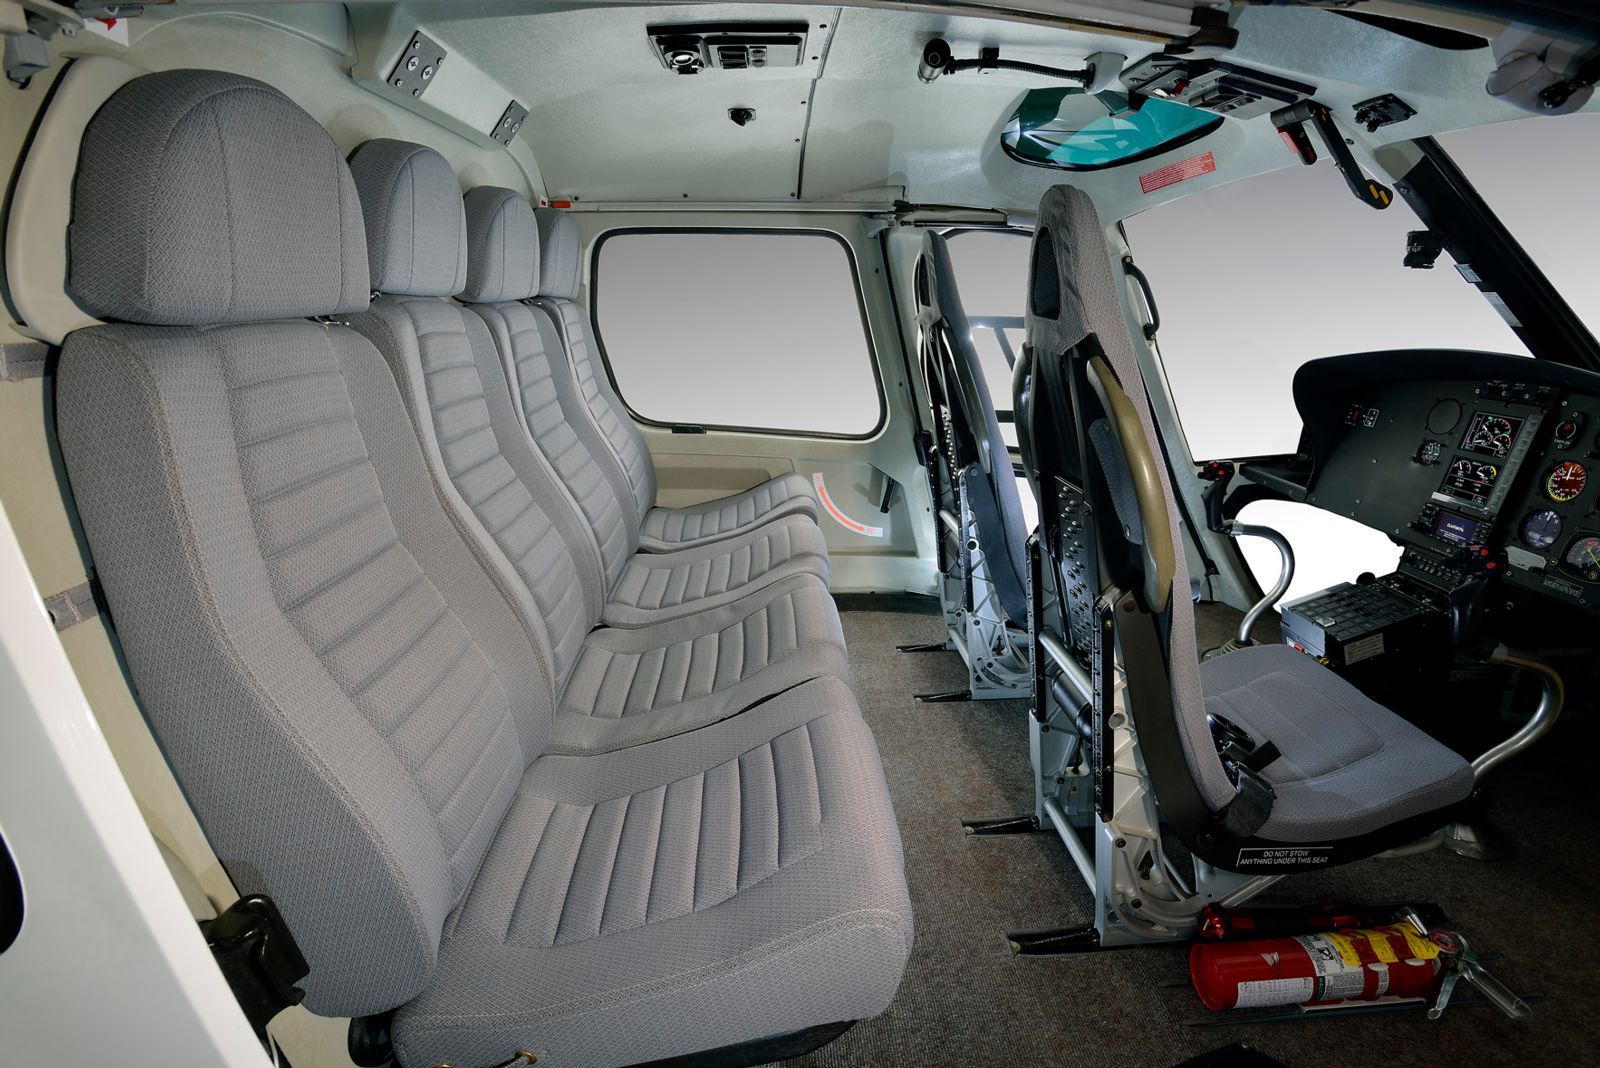 Eurocopter AS350 B3 gallery image /userfiles/images/Eurocopter_AS350B3_sn4508/int1c_072.jpg